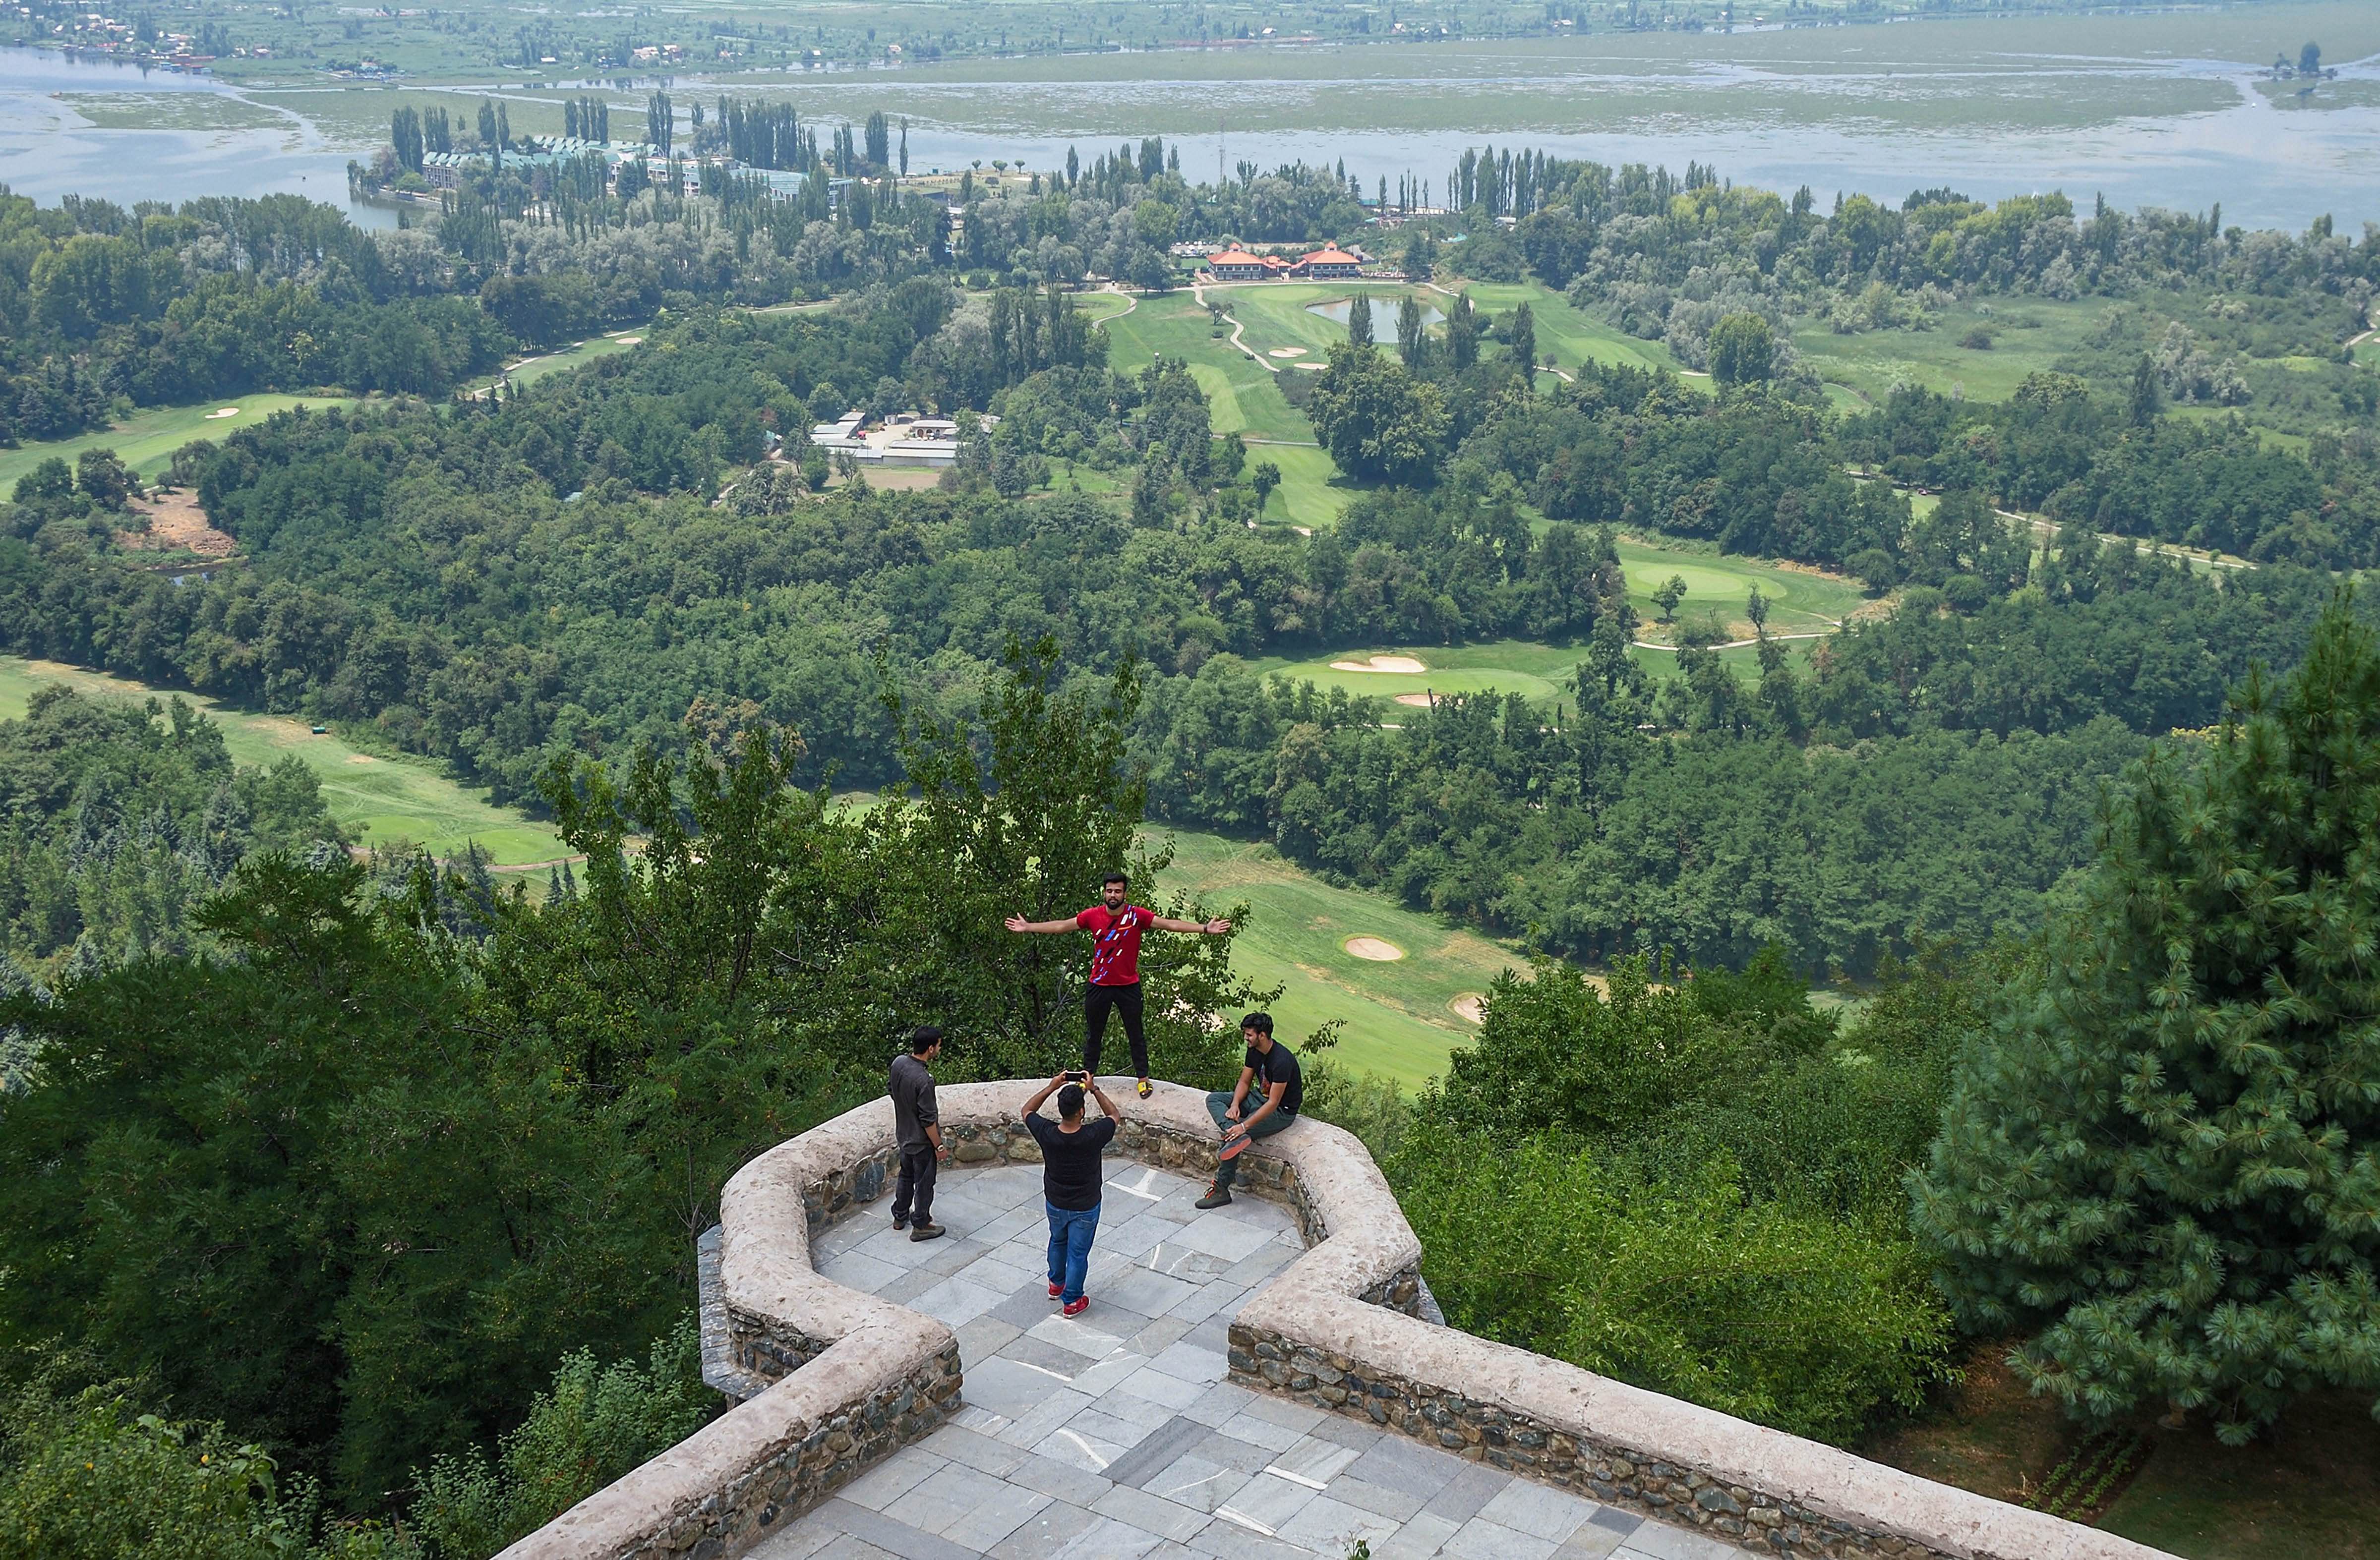 Visitors at Mughal Garden after the authorities decided to reopen it for tourists, during Unlock 2.0, in Srinagar, Wednesday, July 8, 2020. (PTI Photo)